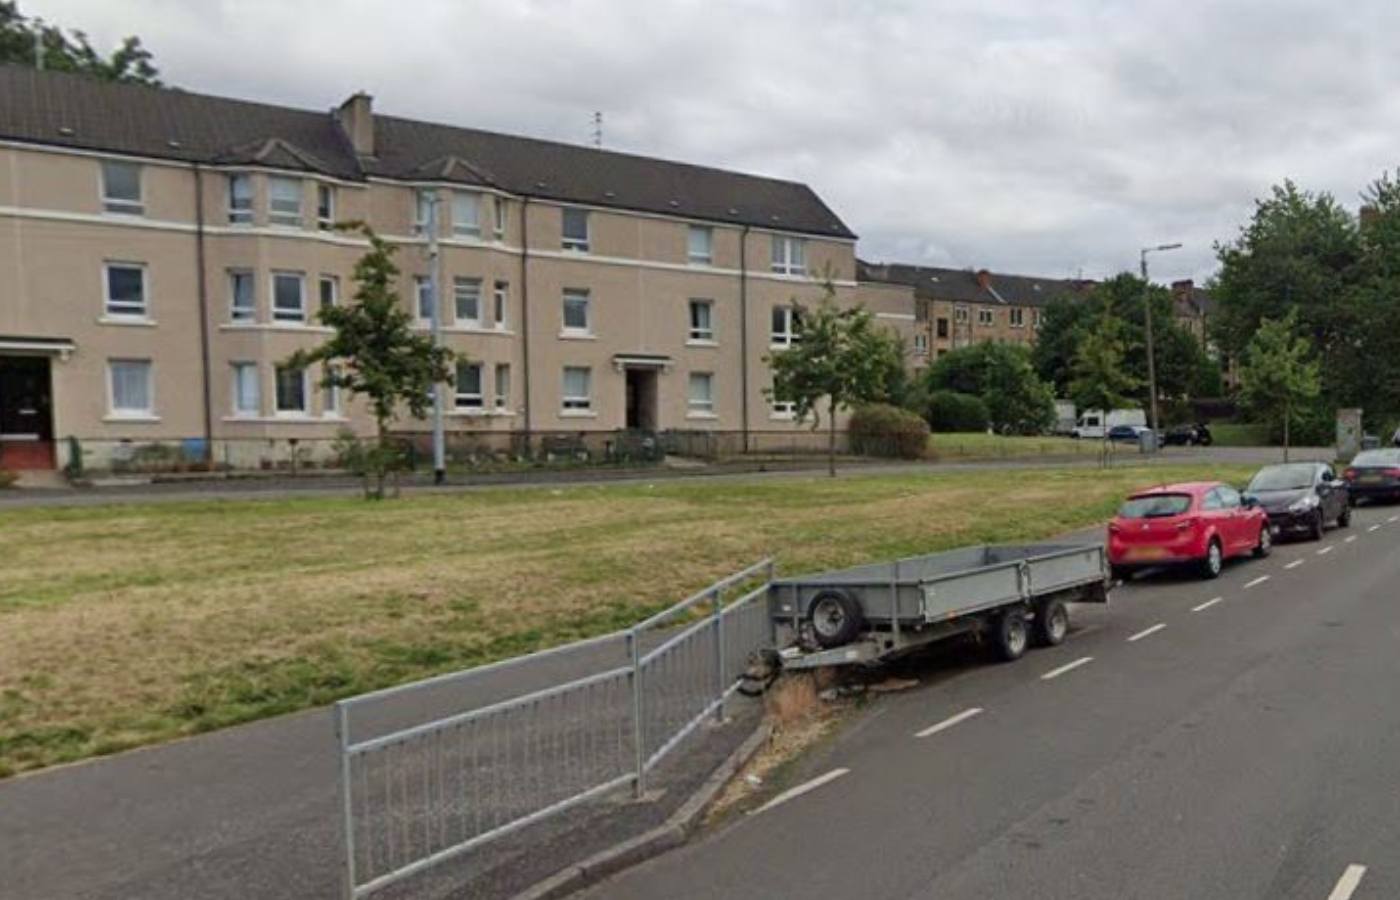 Police were called to reports of concern for a person on Jura Street and a woman's body was found in a flat.